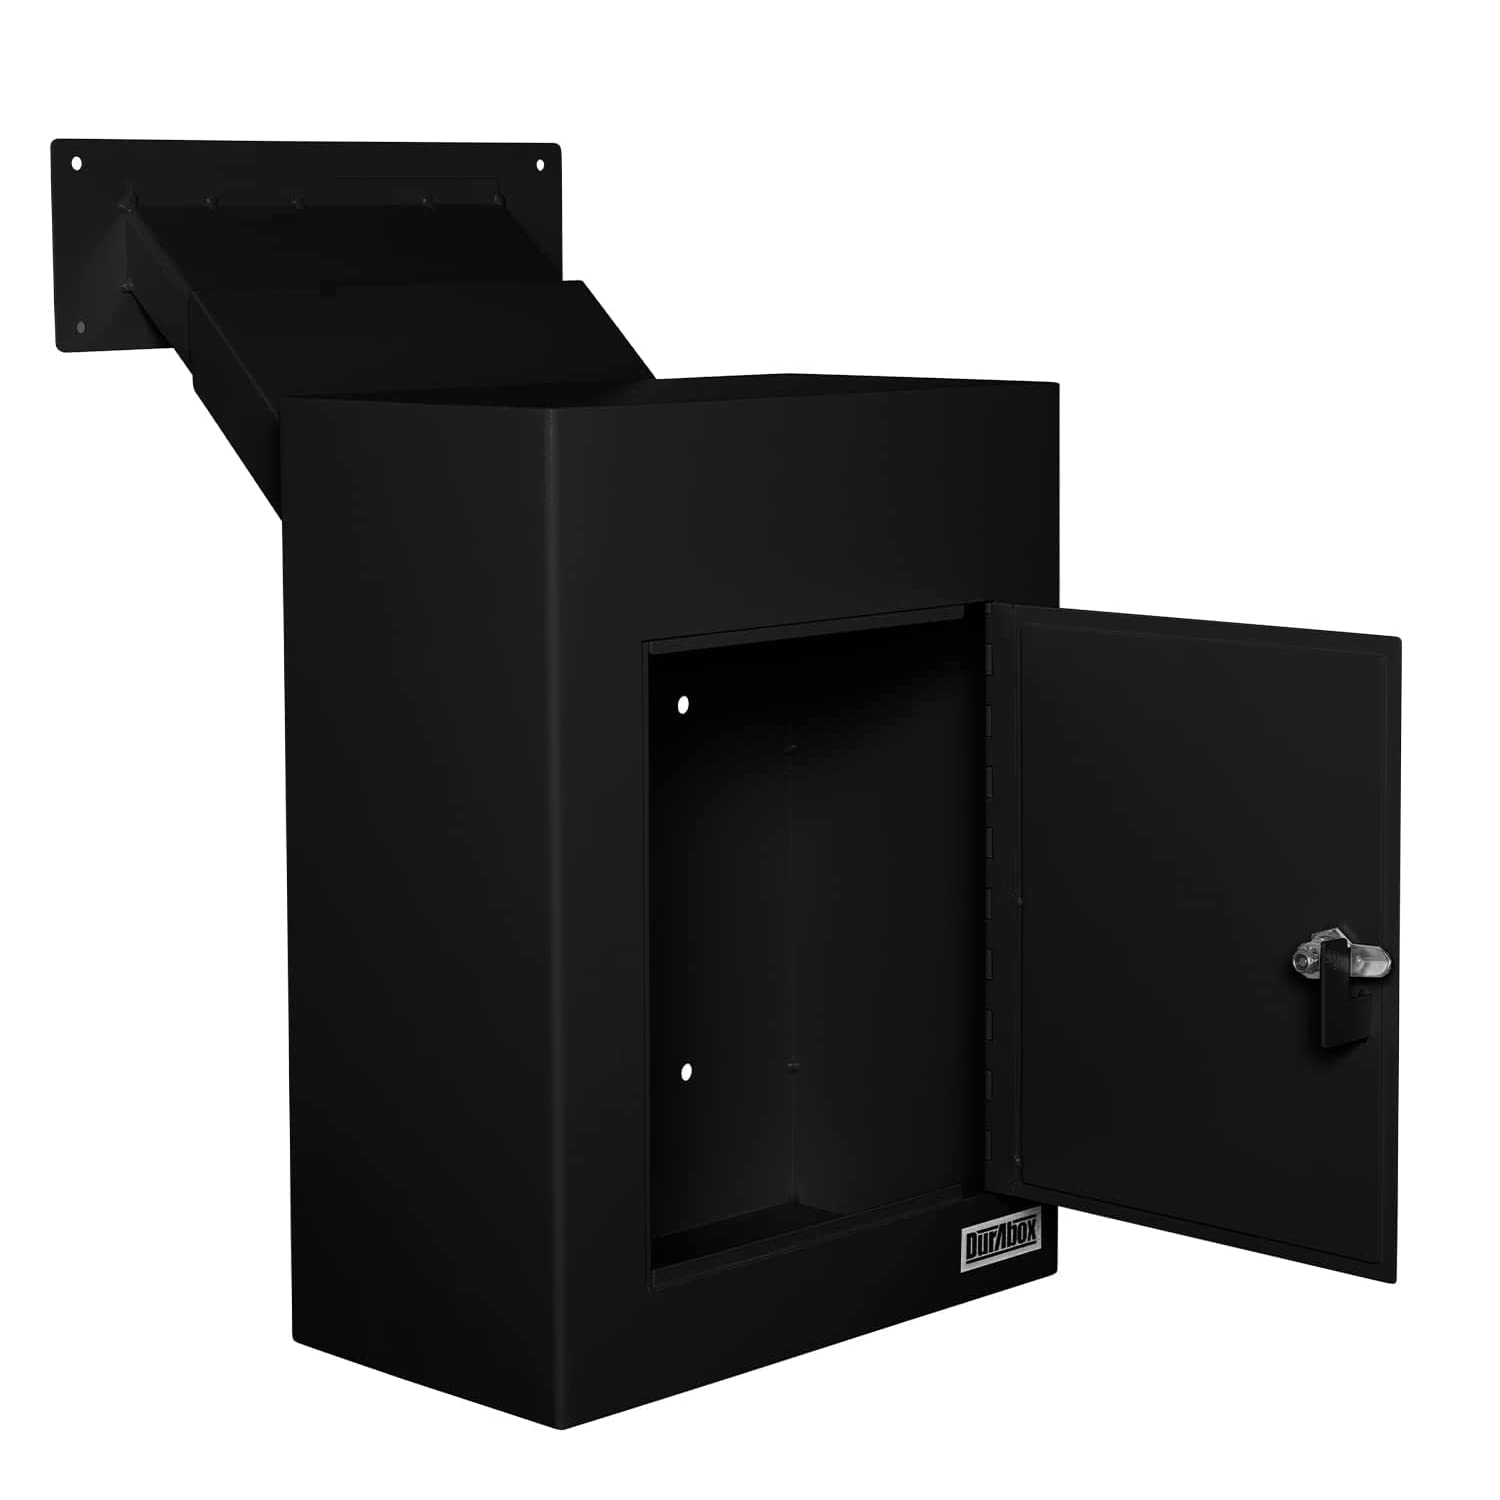 Durabox D700 Through The Wall Drop Box, Tubular Key Locking Secure Mailbox with Adjustable Chute Deposit, Pre-Drilled Mounting H